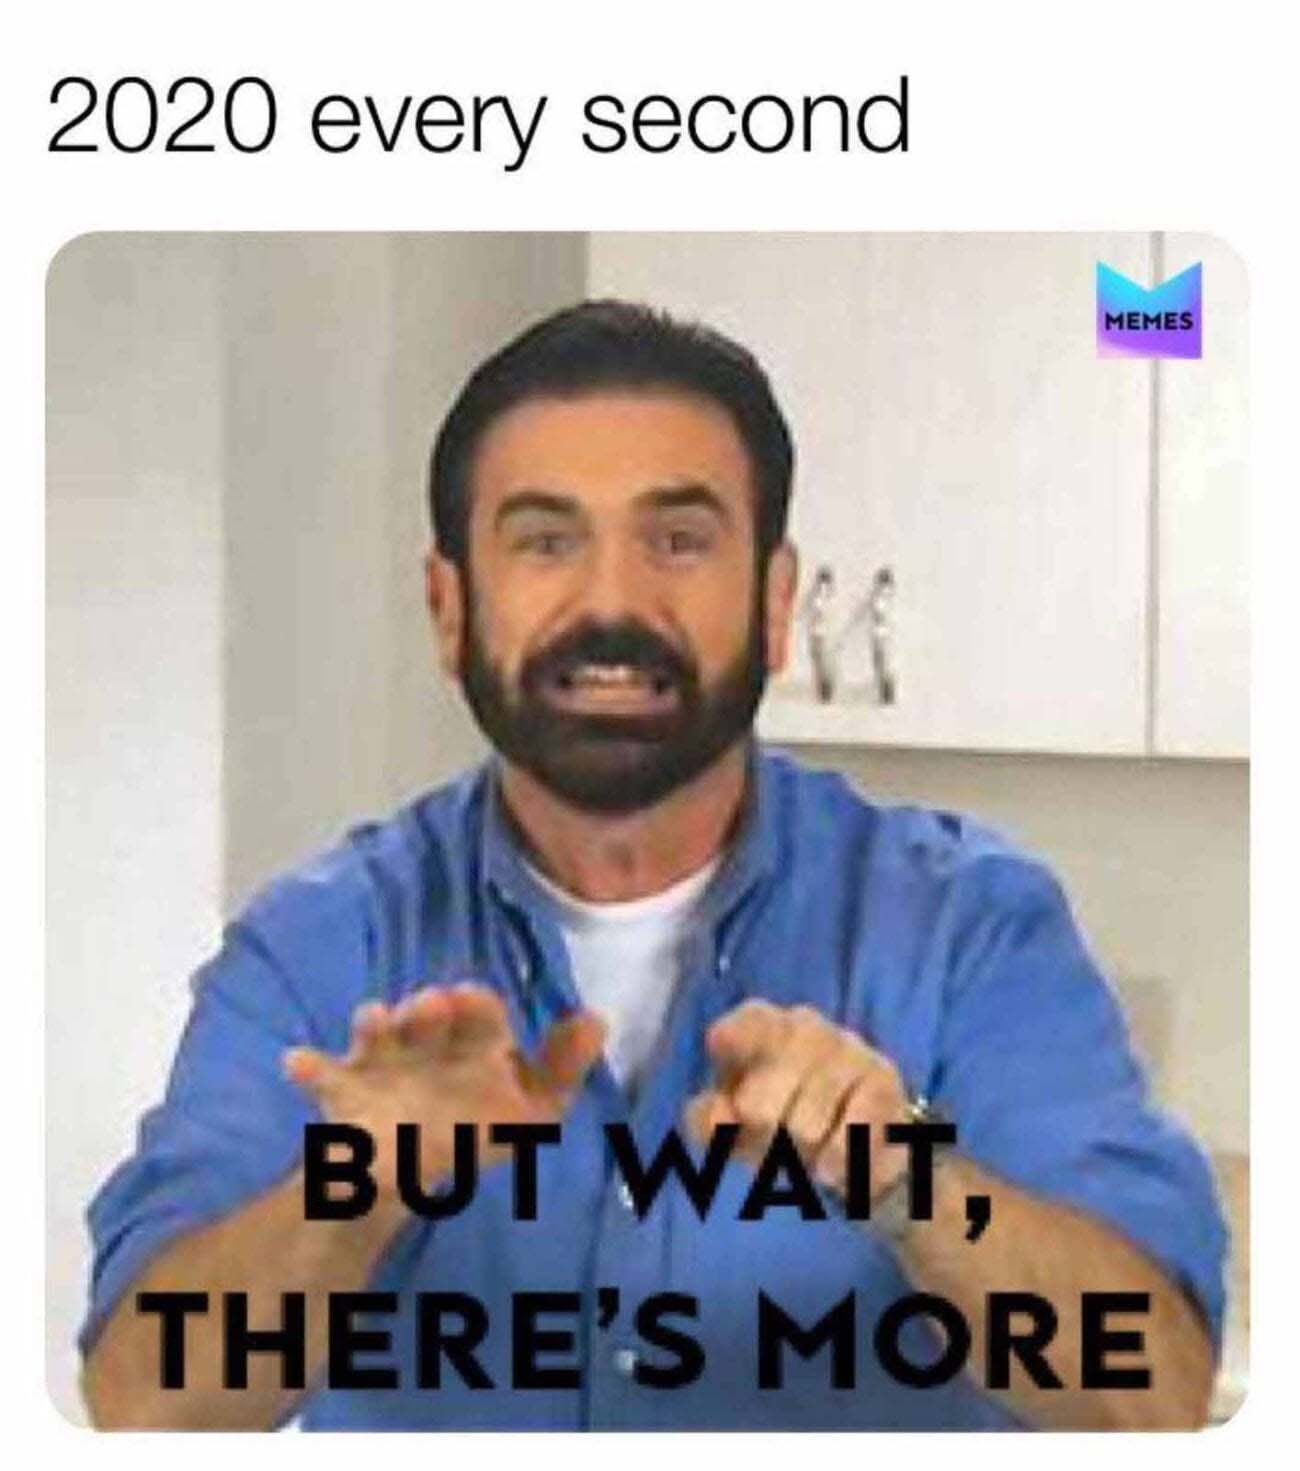 People Are Celebrating End Of 2020 With Memes All About Women